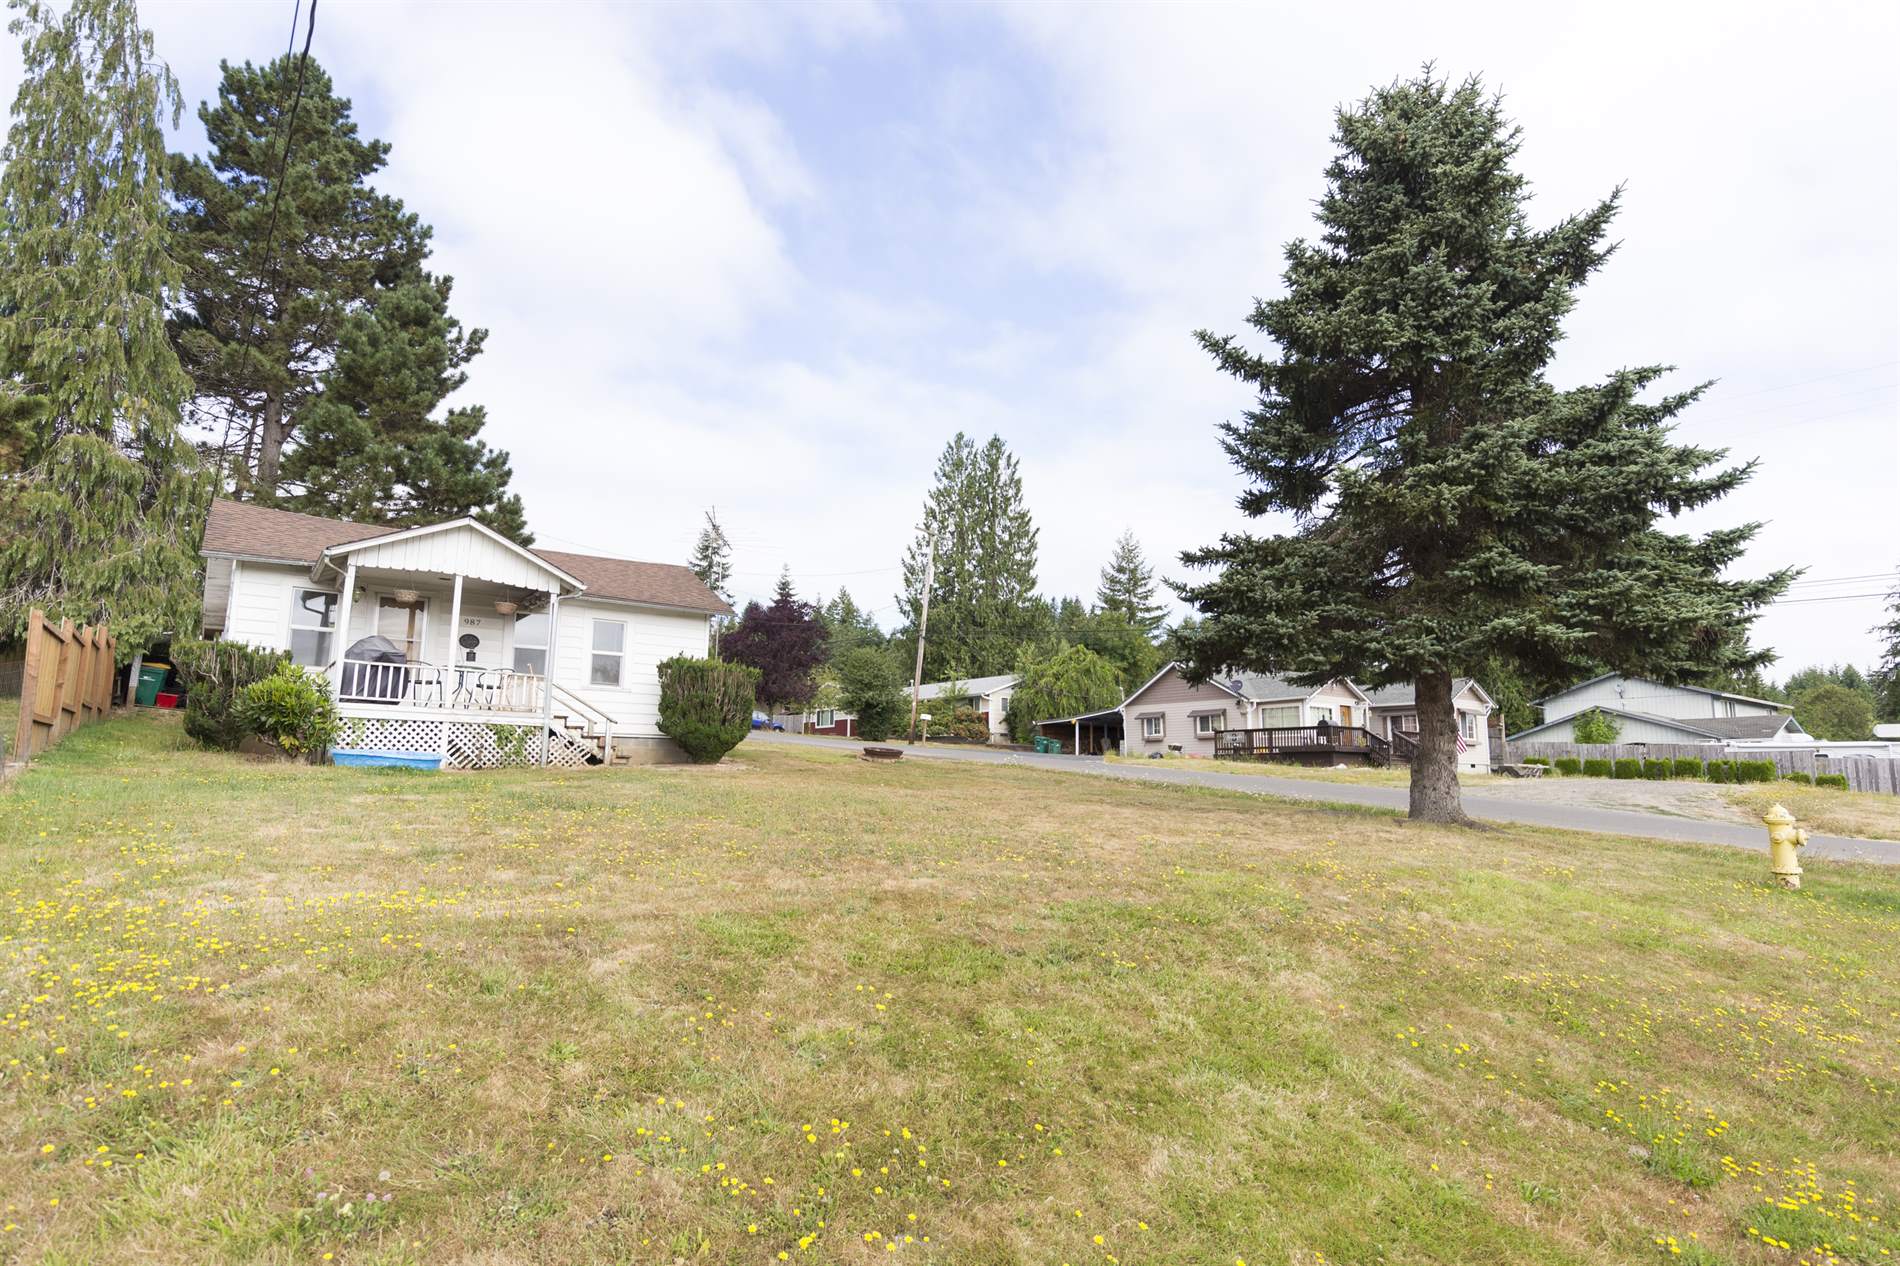 987 2nd Ave., Vernonia, OR 97064